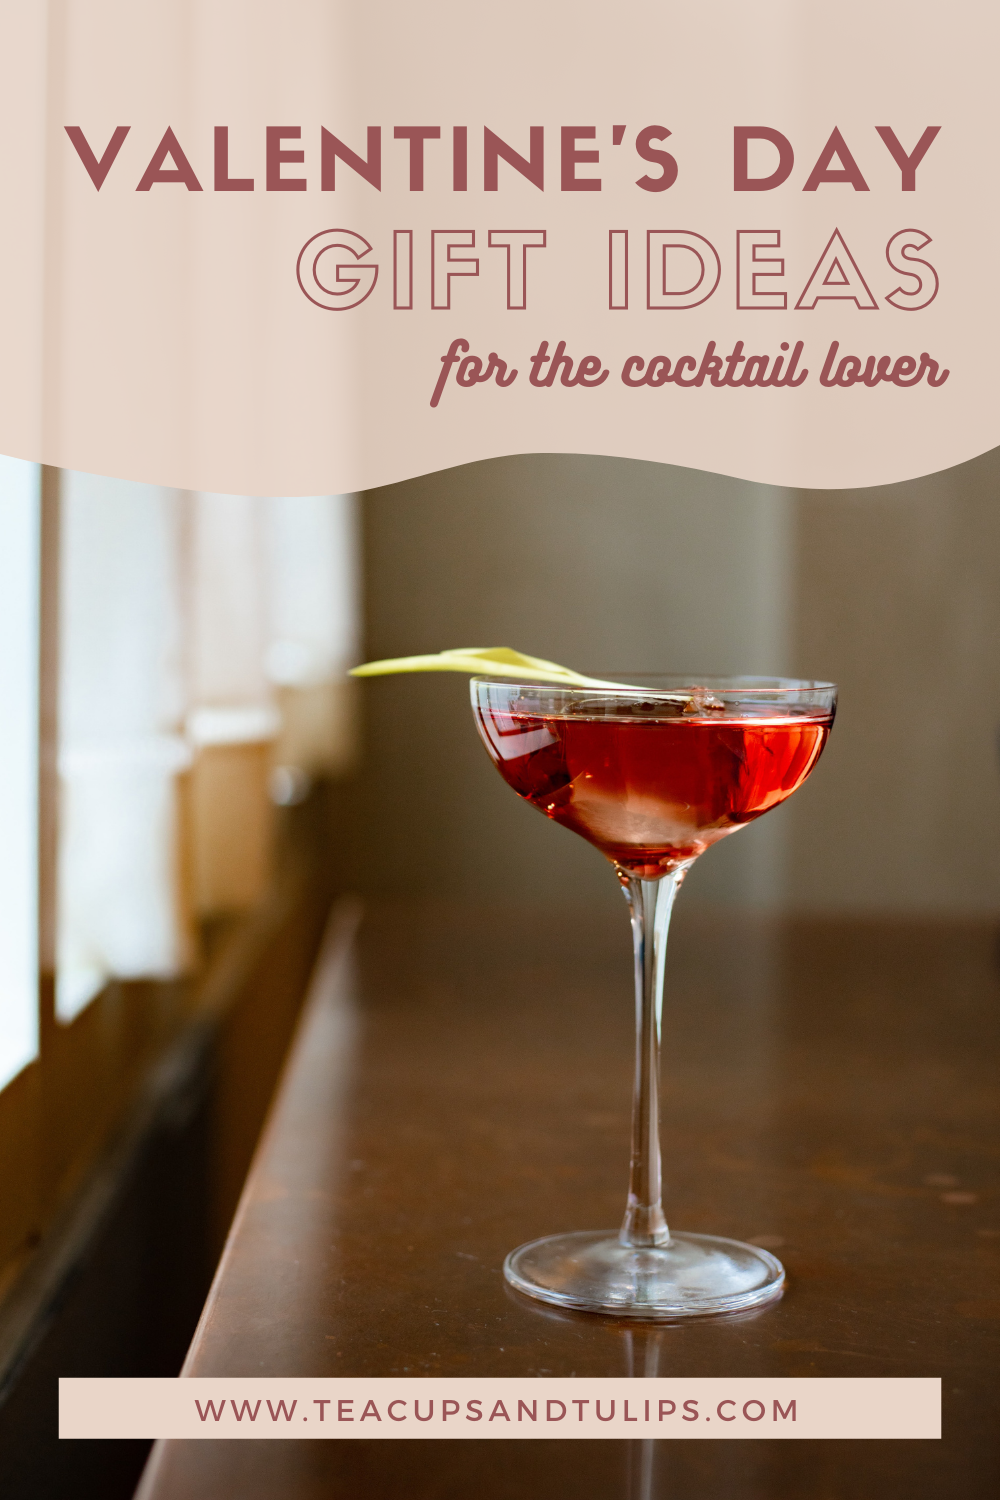 Valentine's day gift ideas for the cocktail lover